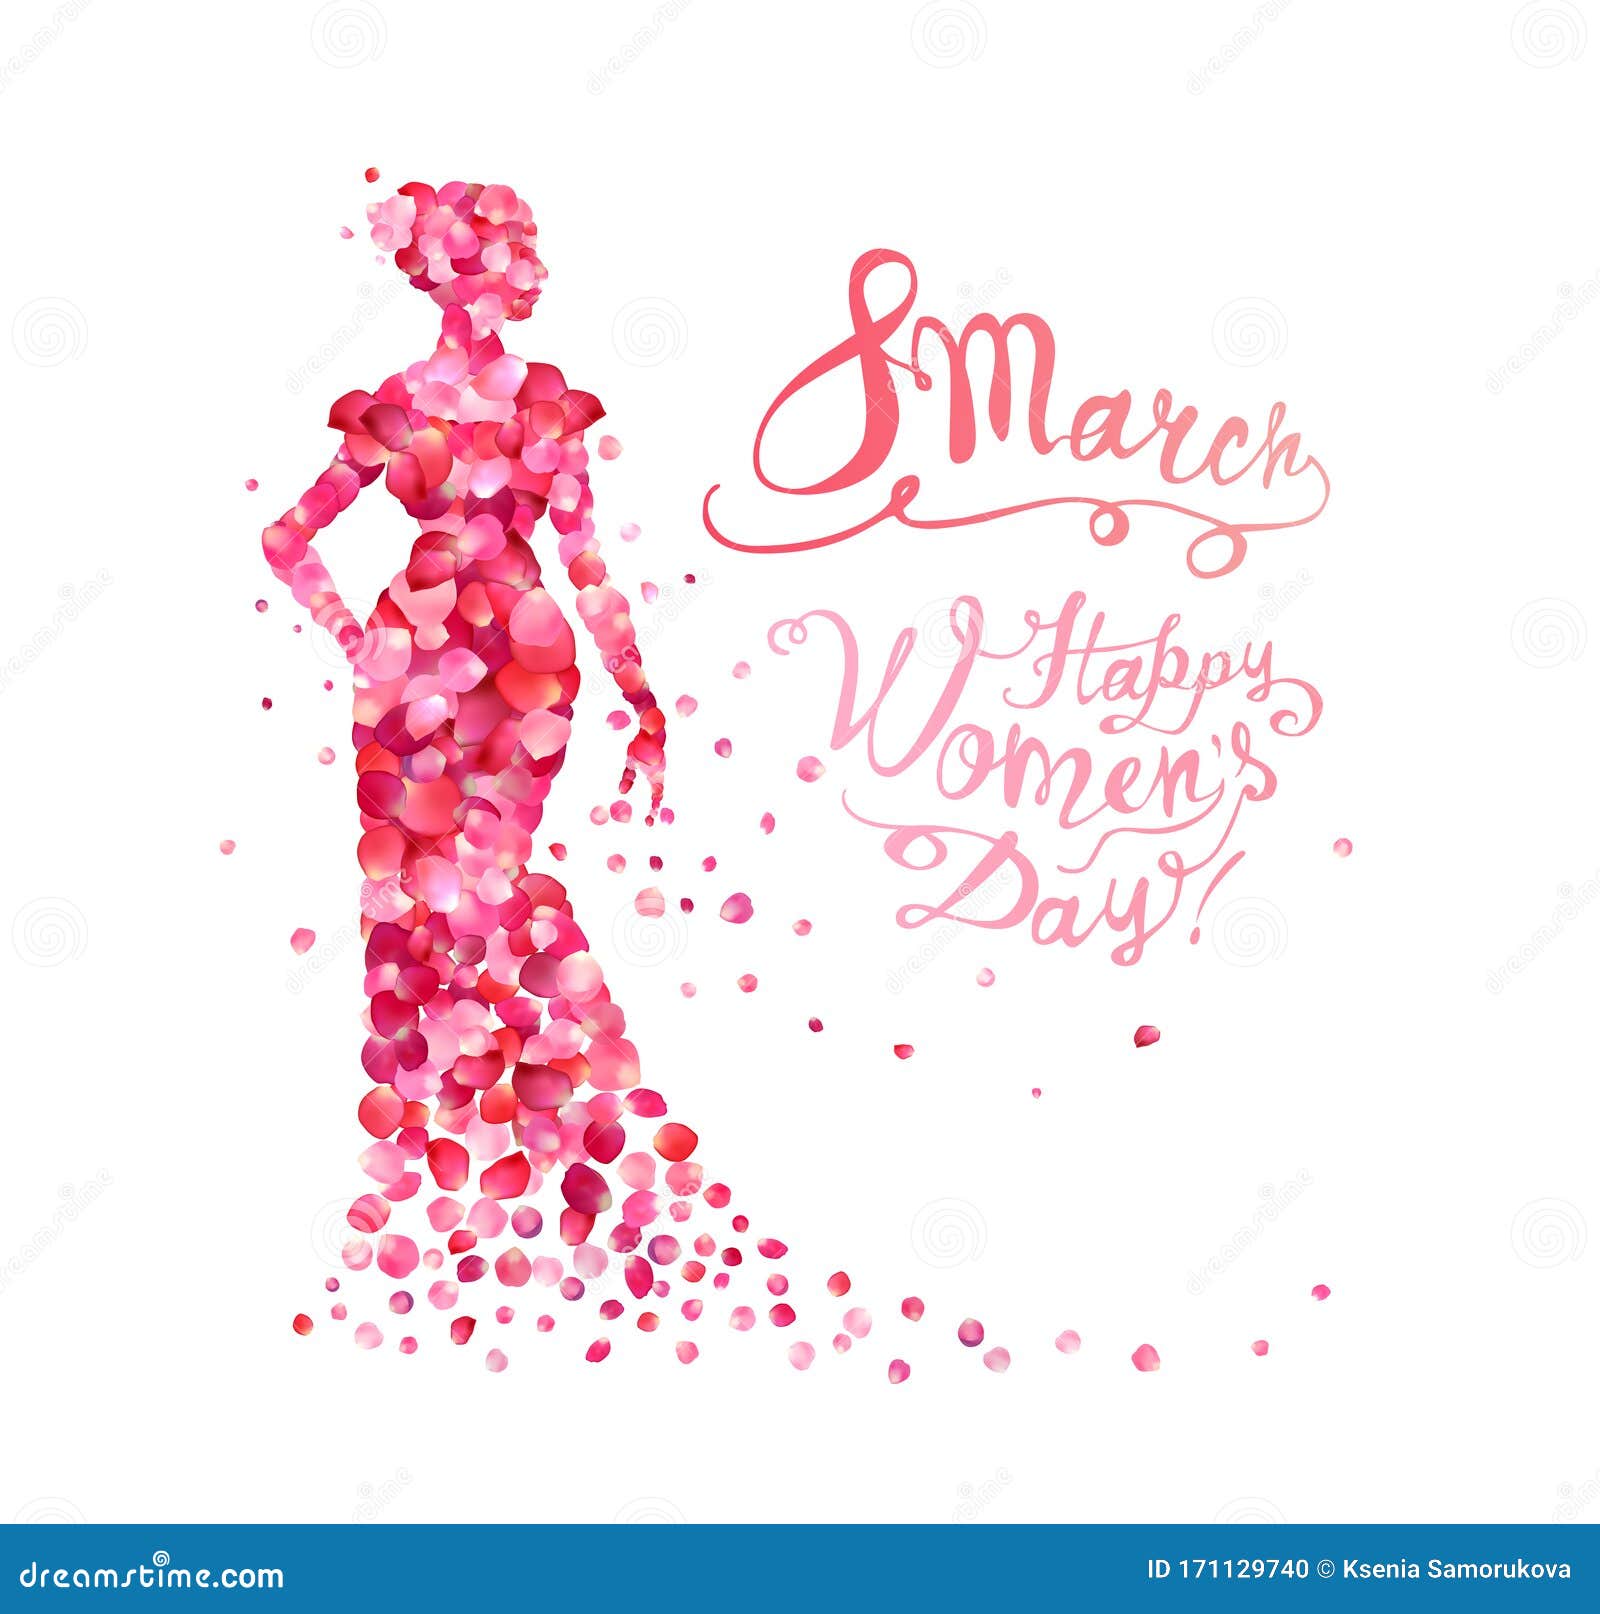 8 March. Happy Women Day Stock Vector. Illustration Of People - 171129740